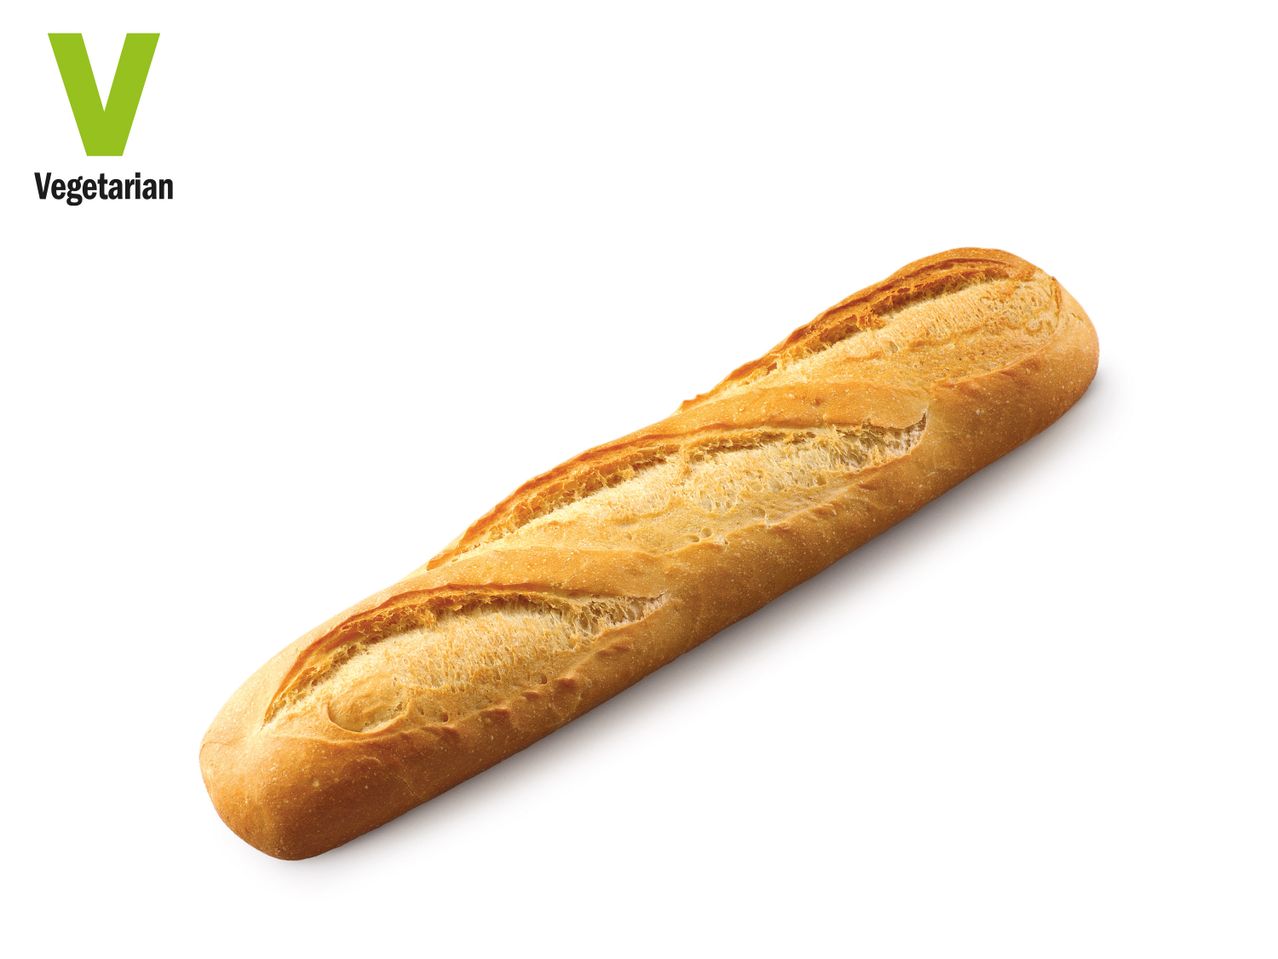 Go to full screen view: Sandwich Baguette - Image 1